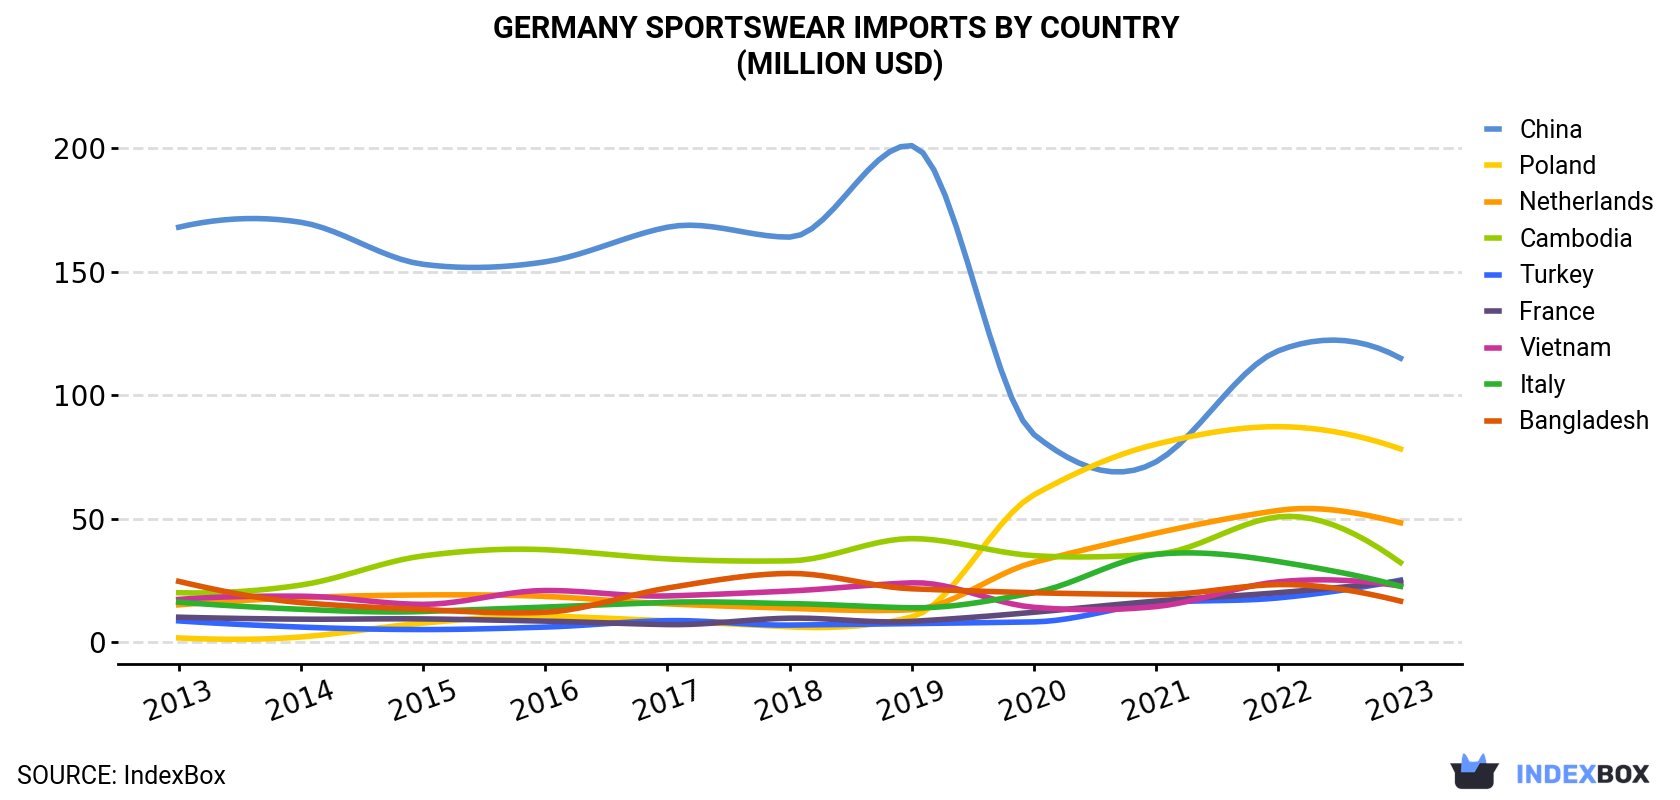 Germany Sportswear Imports By Country (Million USD)